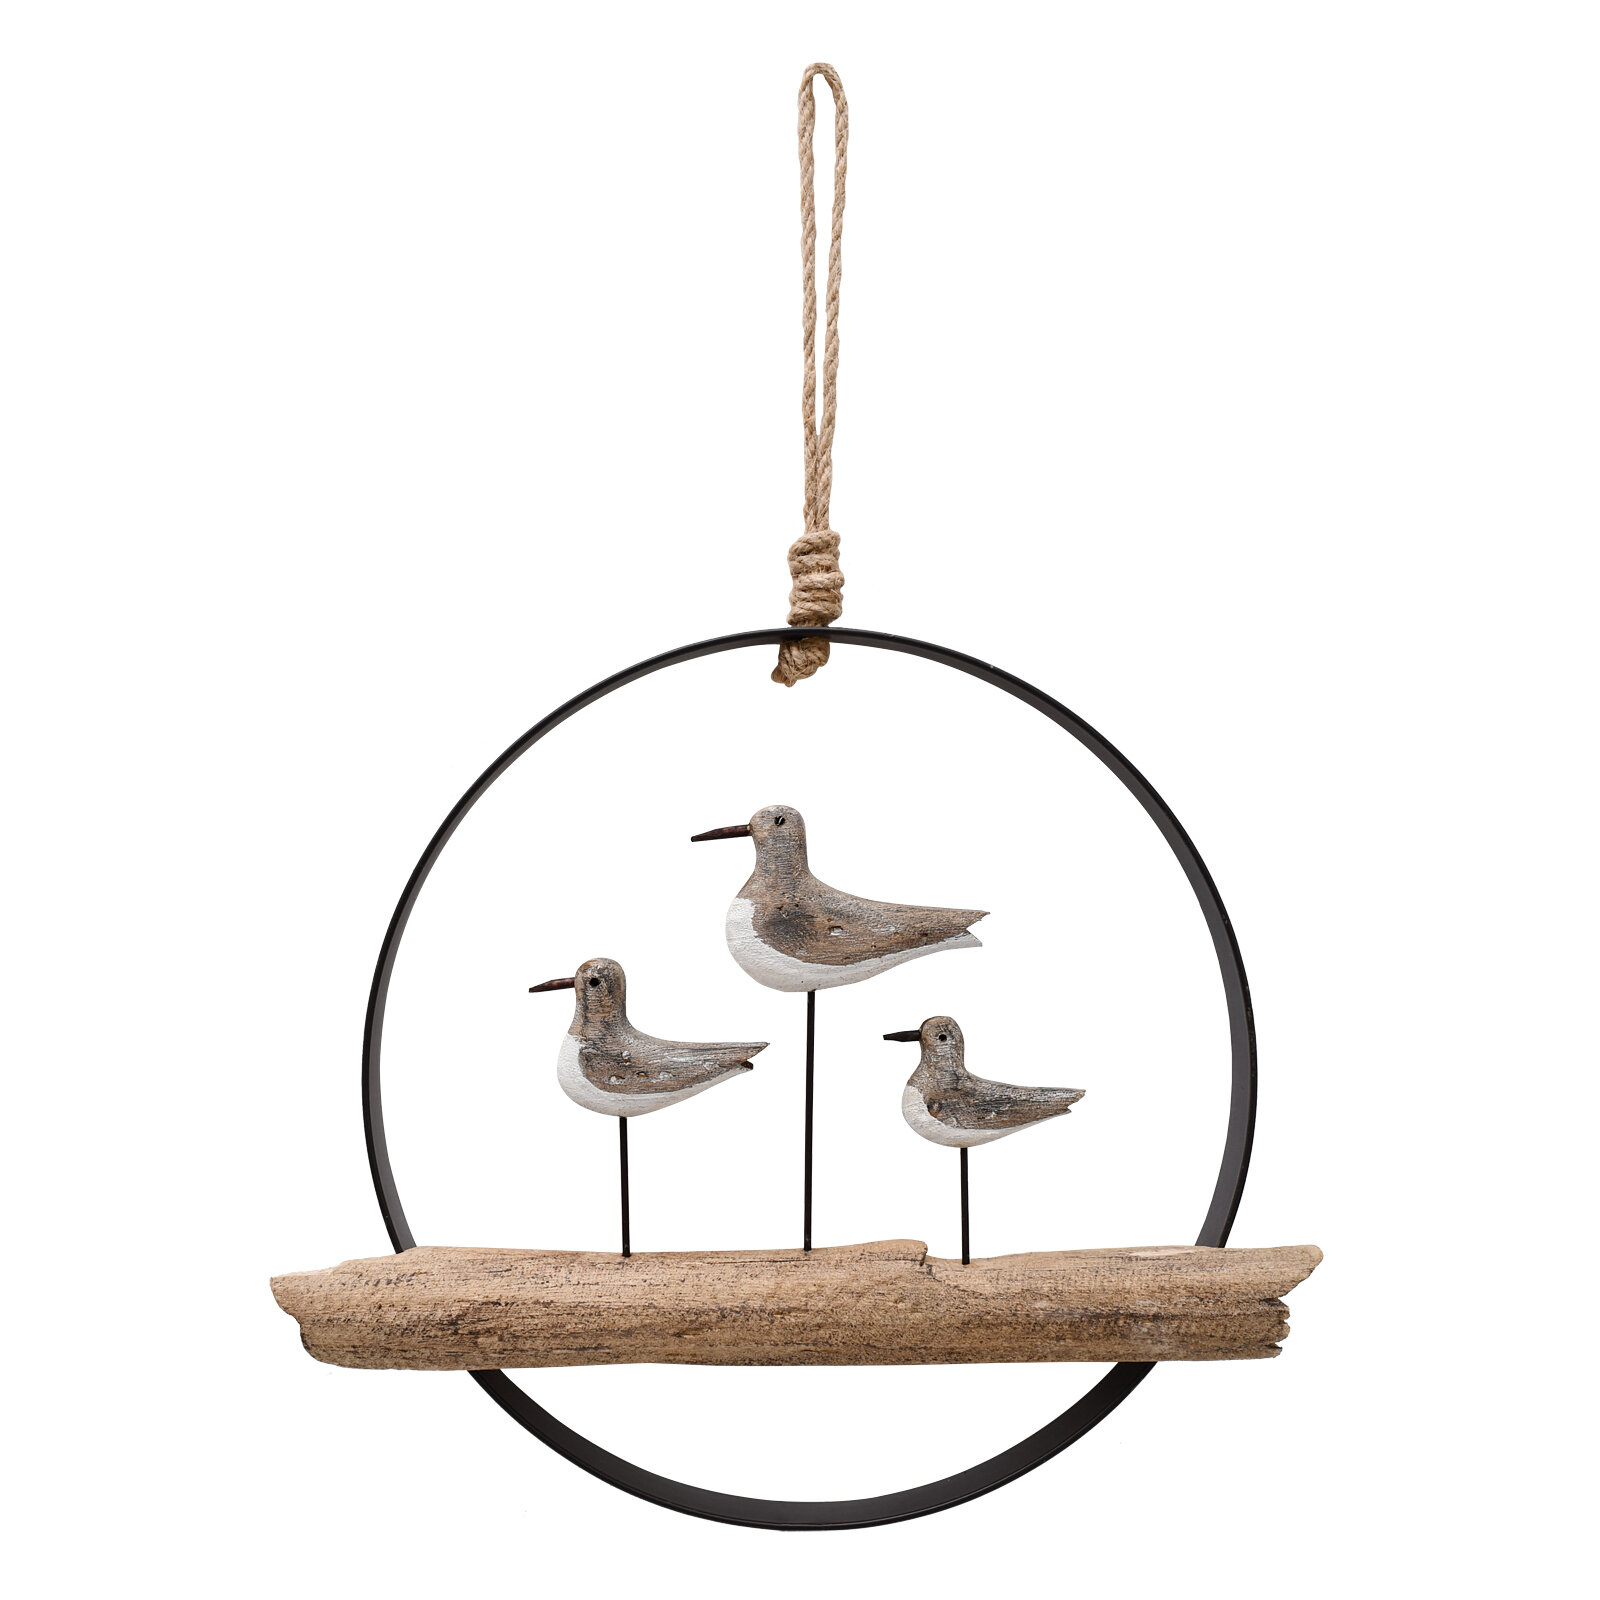 Details about   Seagull Wall Hanging Sea Bird Background Decor Mediterranean Style Ornament Chic